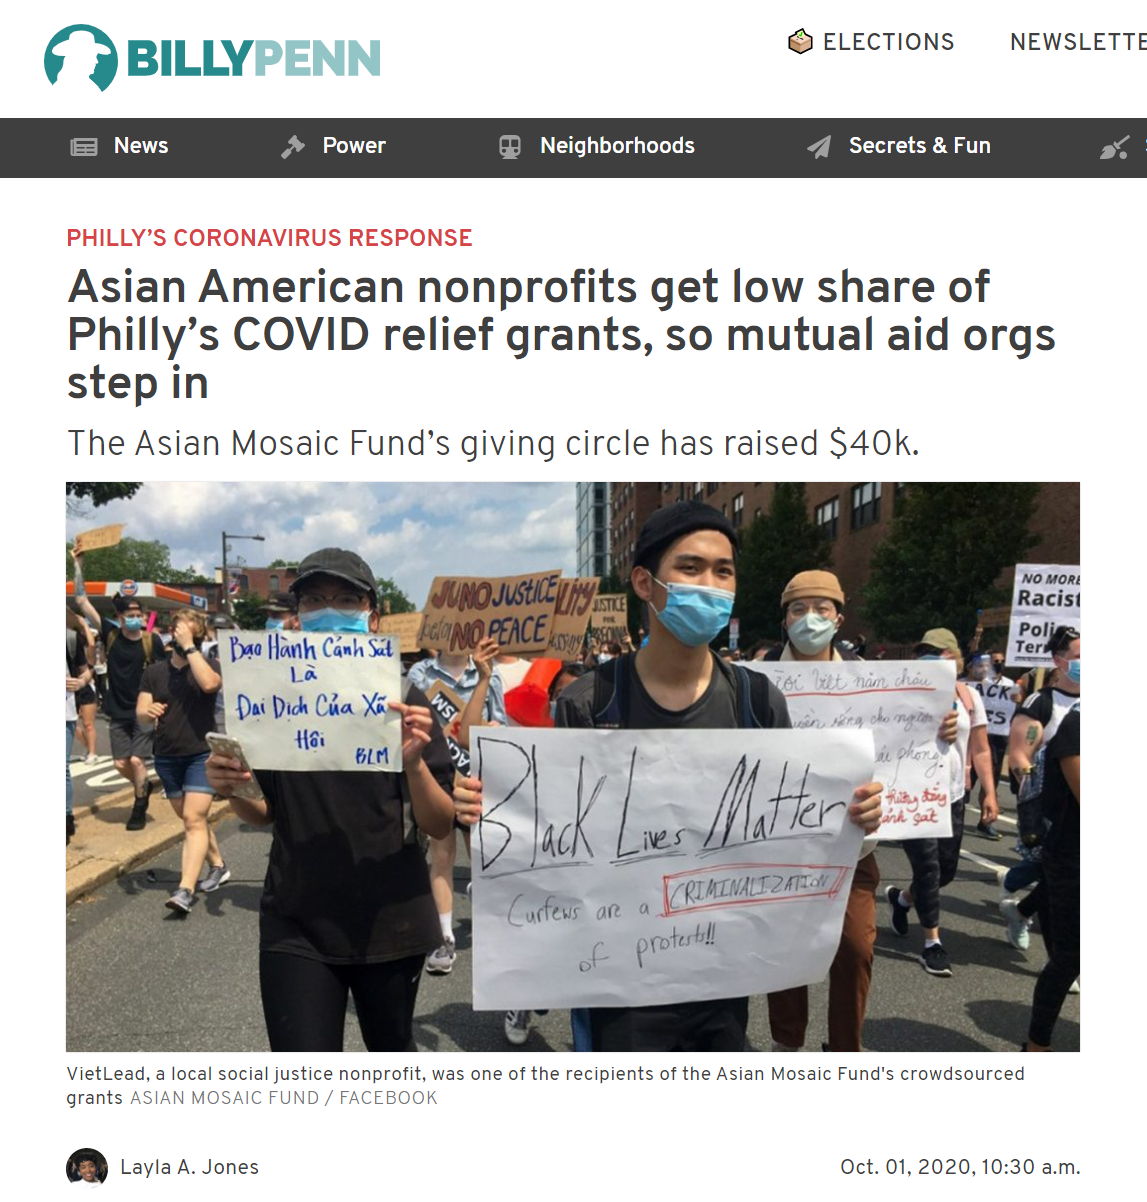 Asian American nonprofits get low share of Philly's COVID relief grants, so mutual aid orgs step in